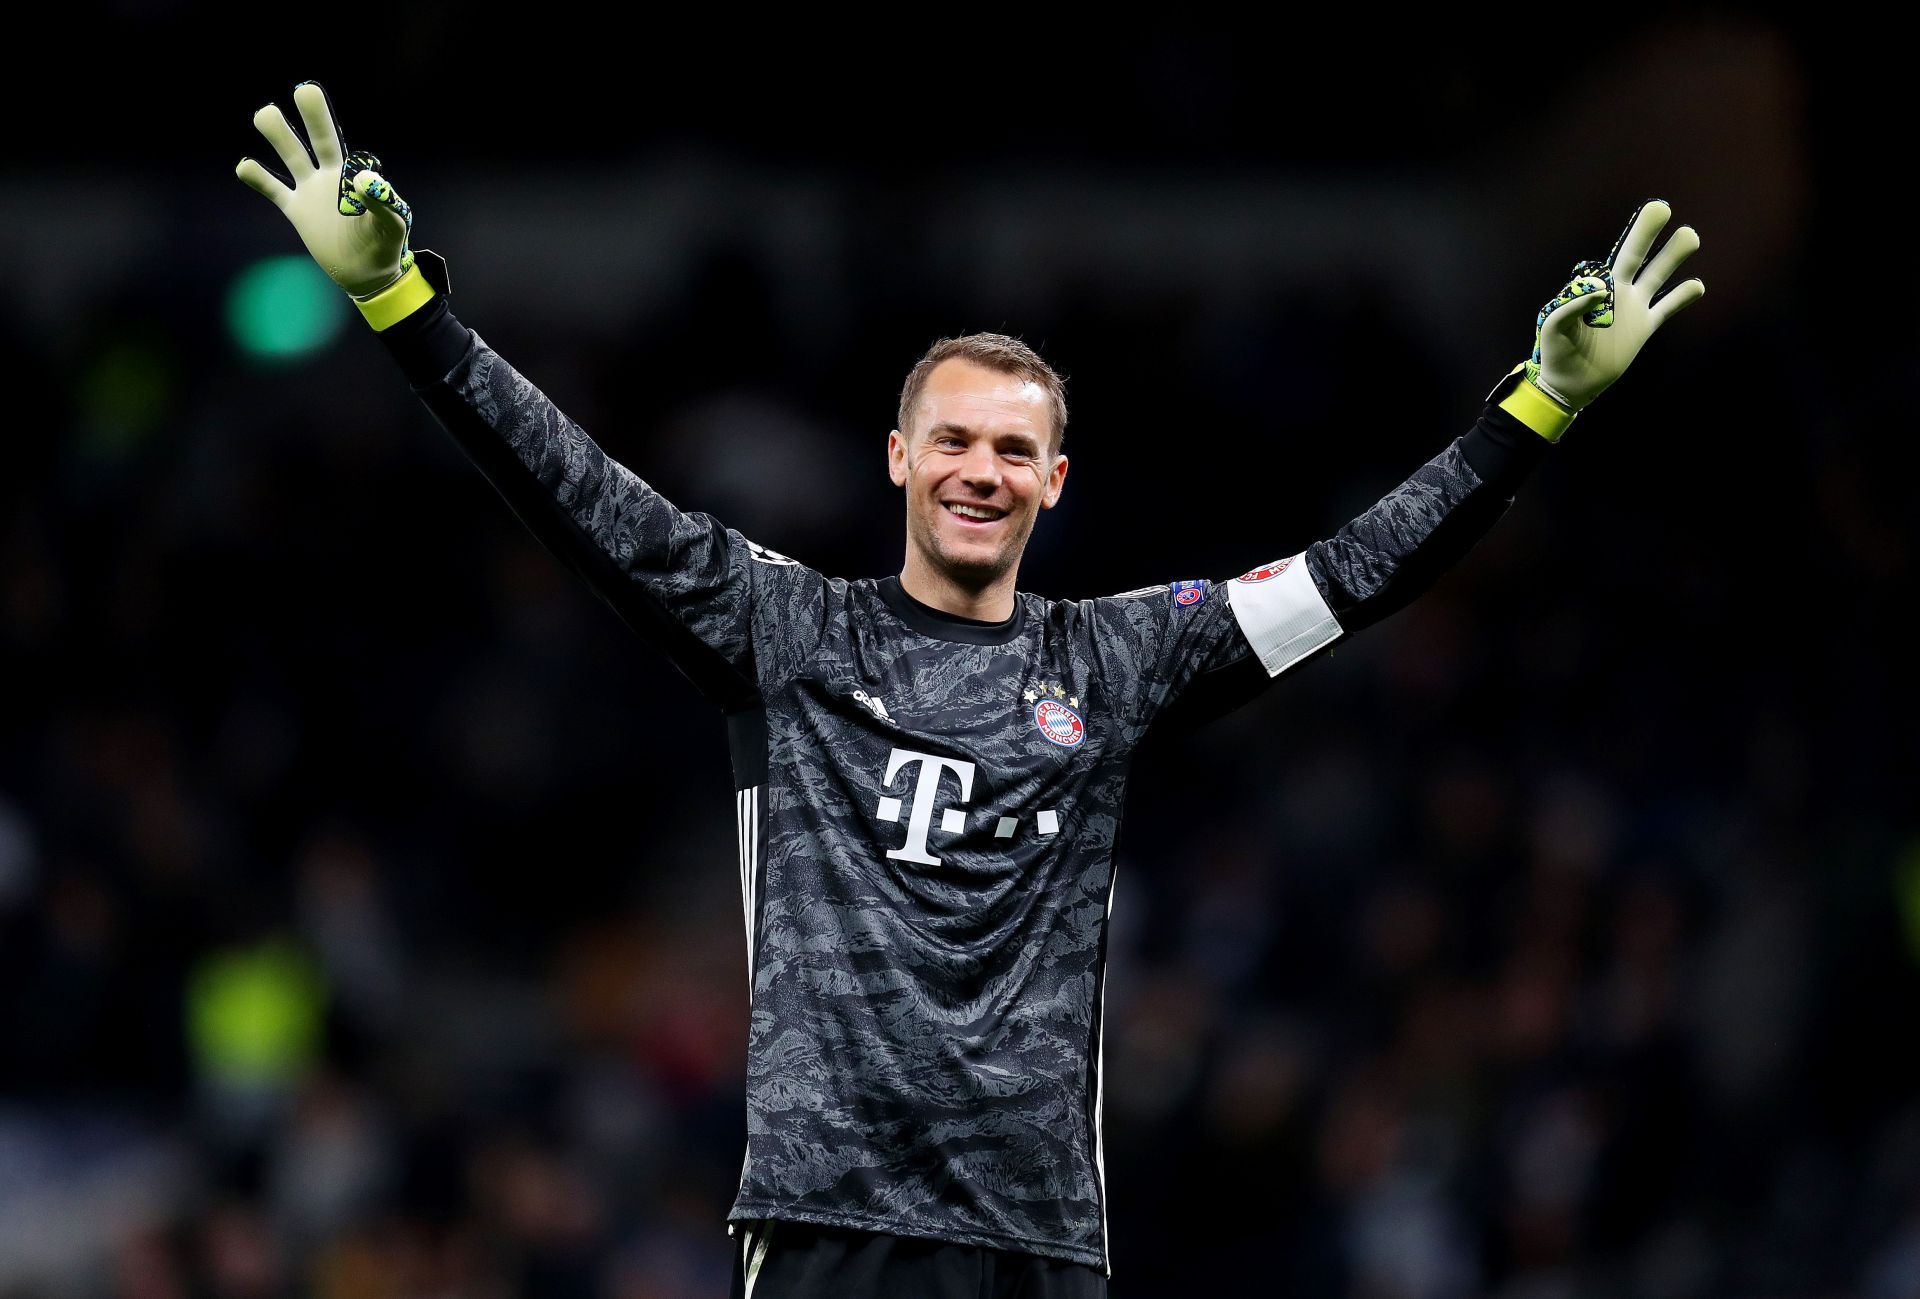 Manuel Neuer is among the best goalkeepers of his generation